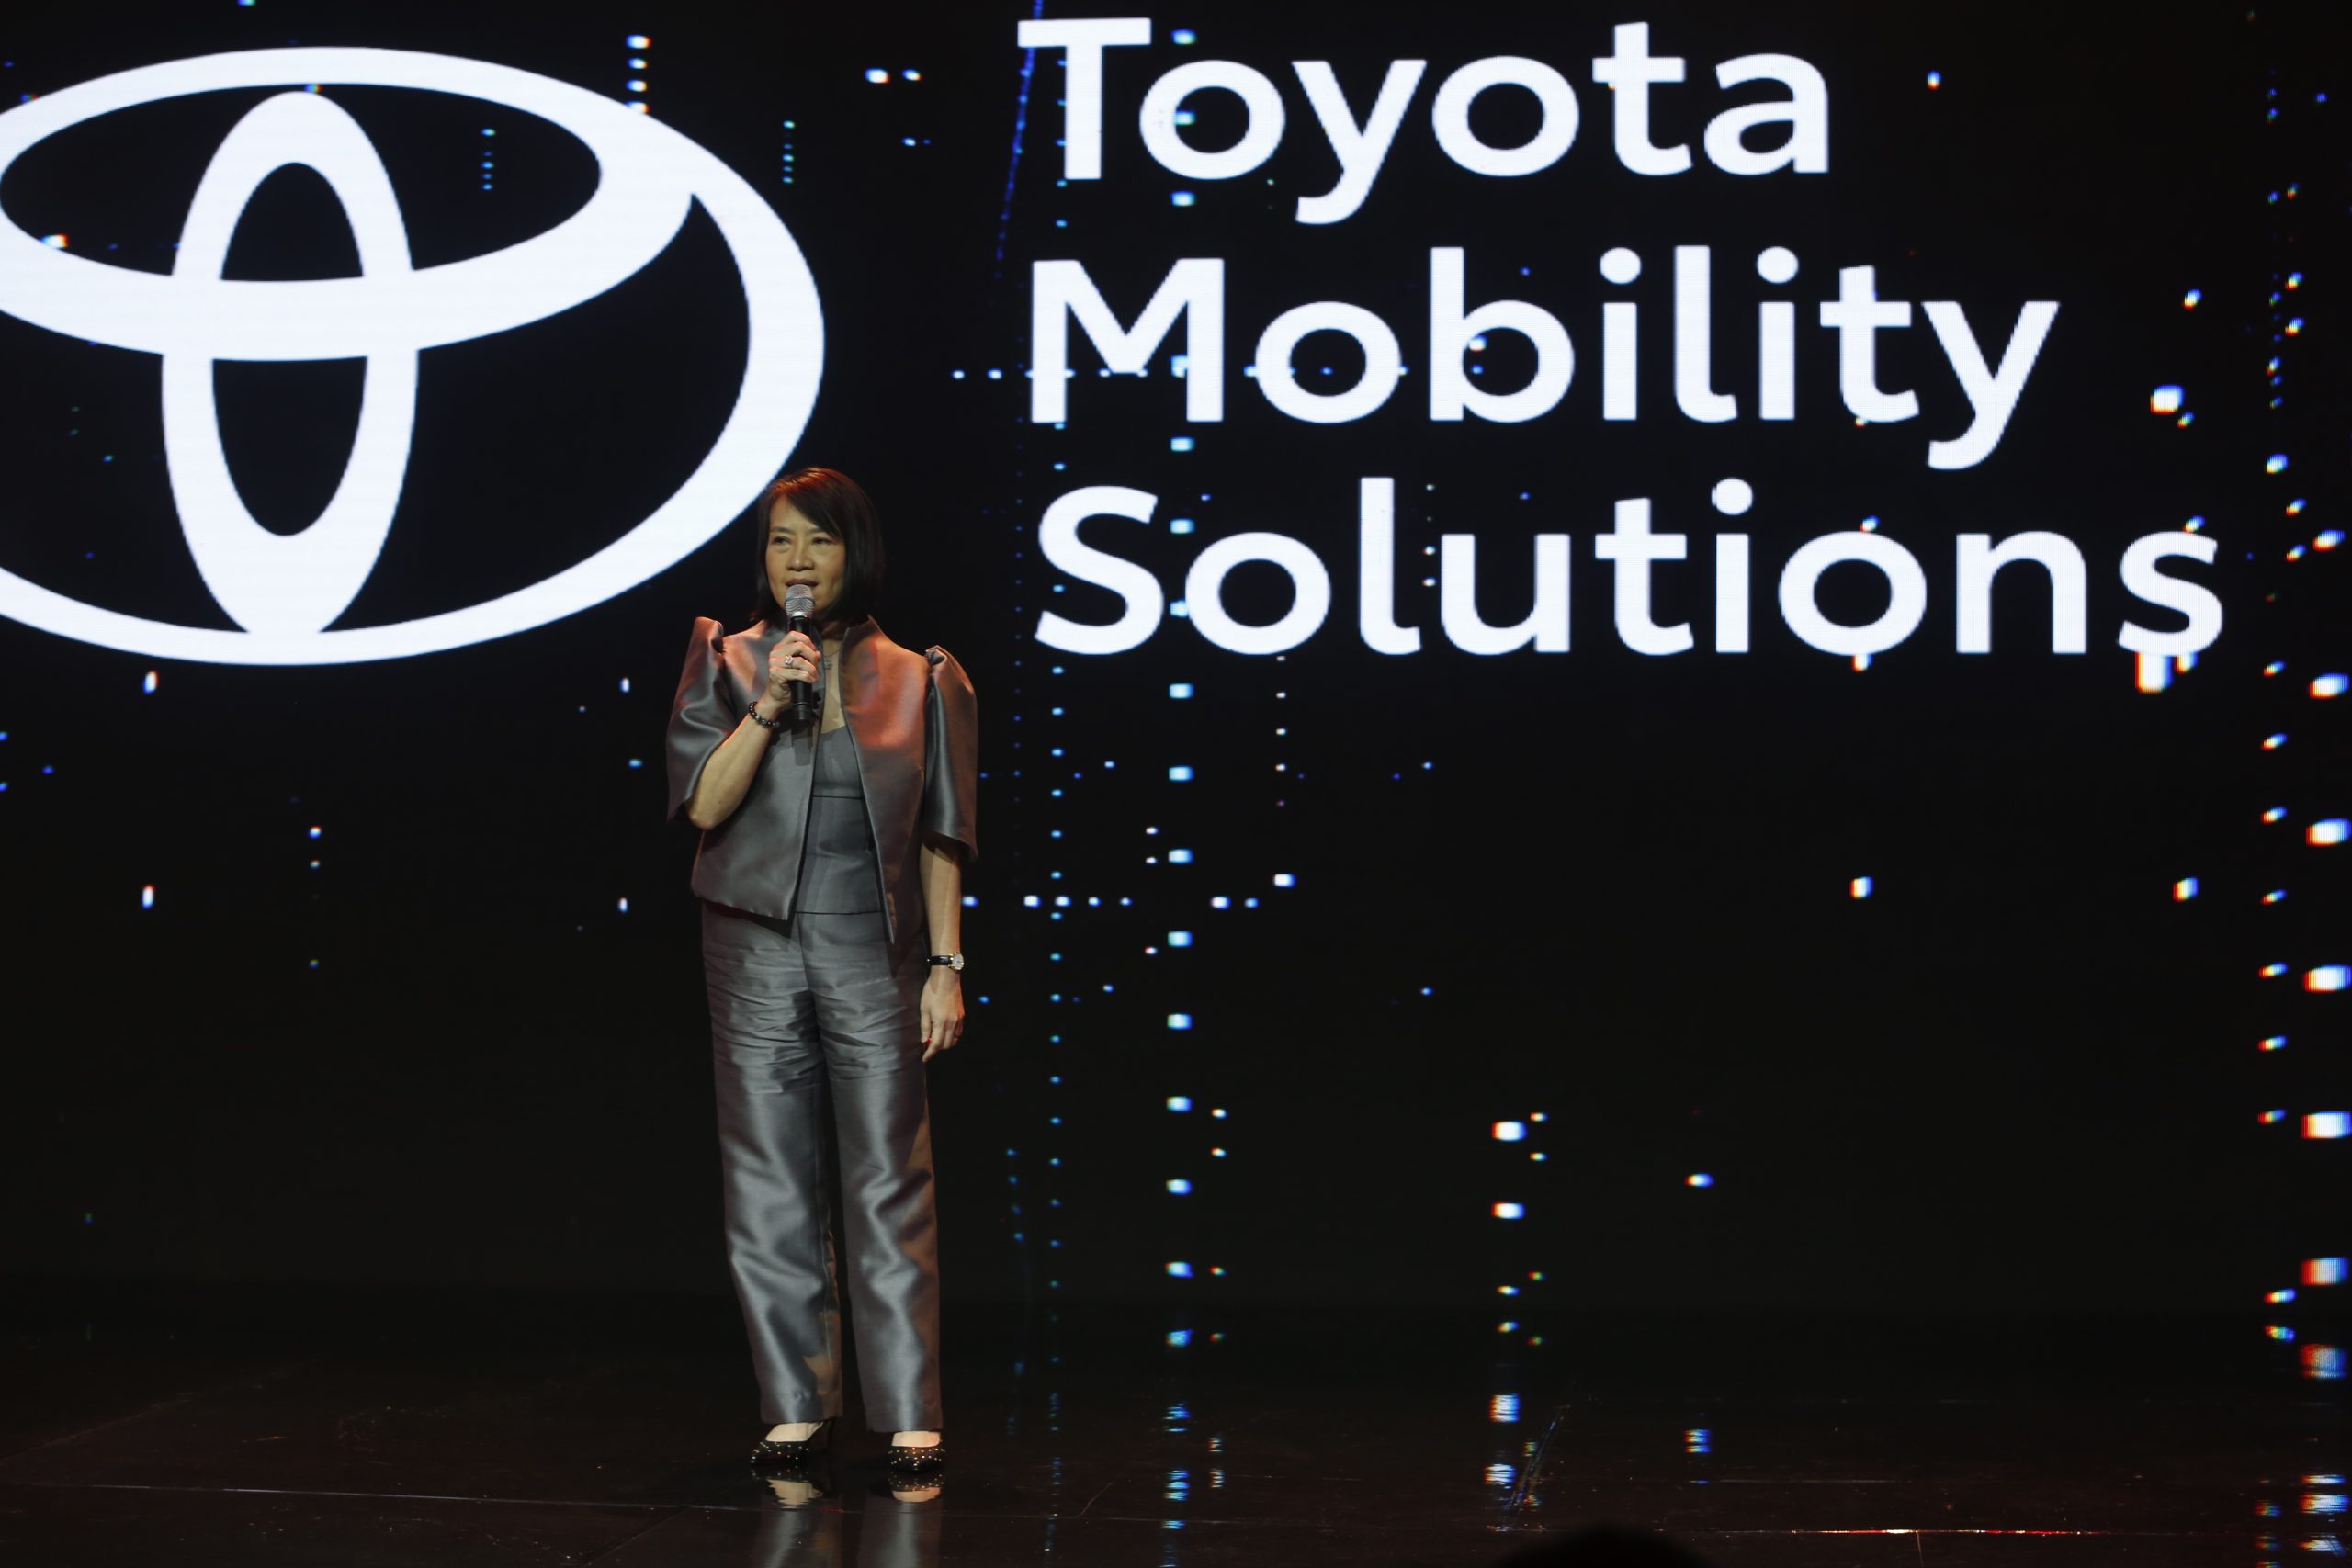 Toyota Mobility Solutions Arevalo 2